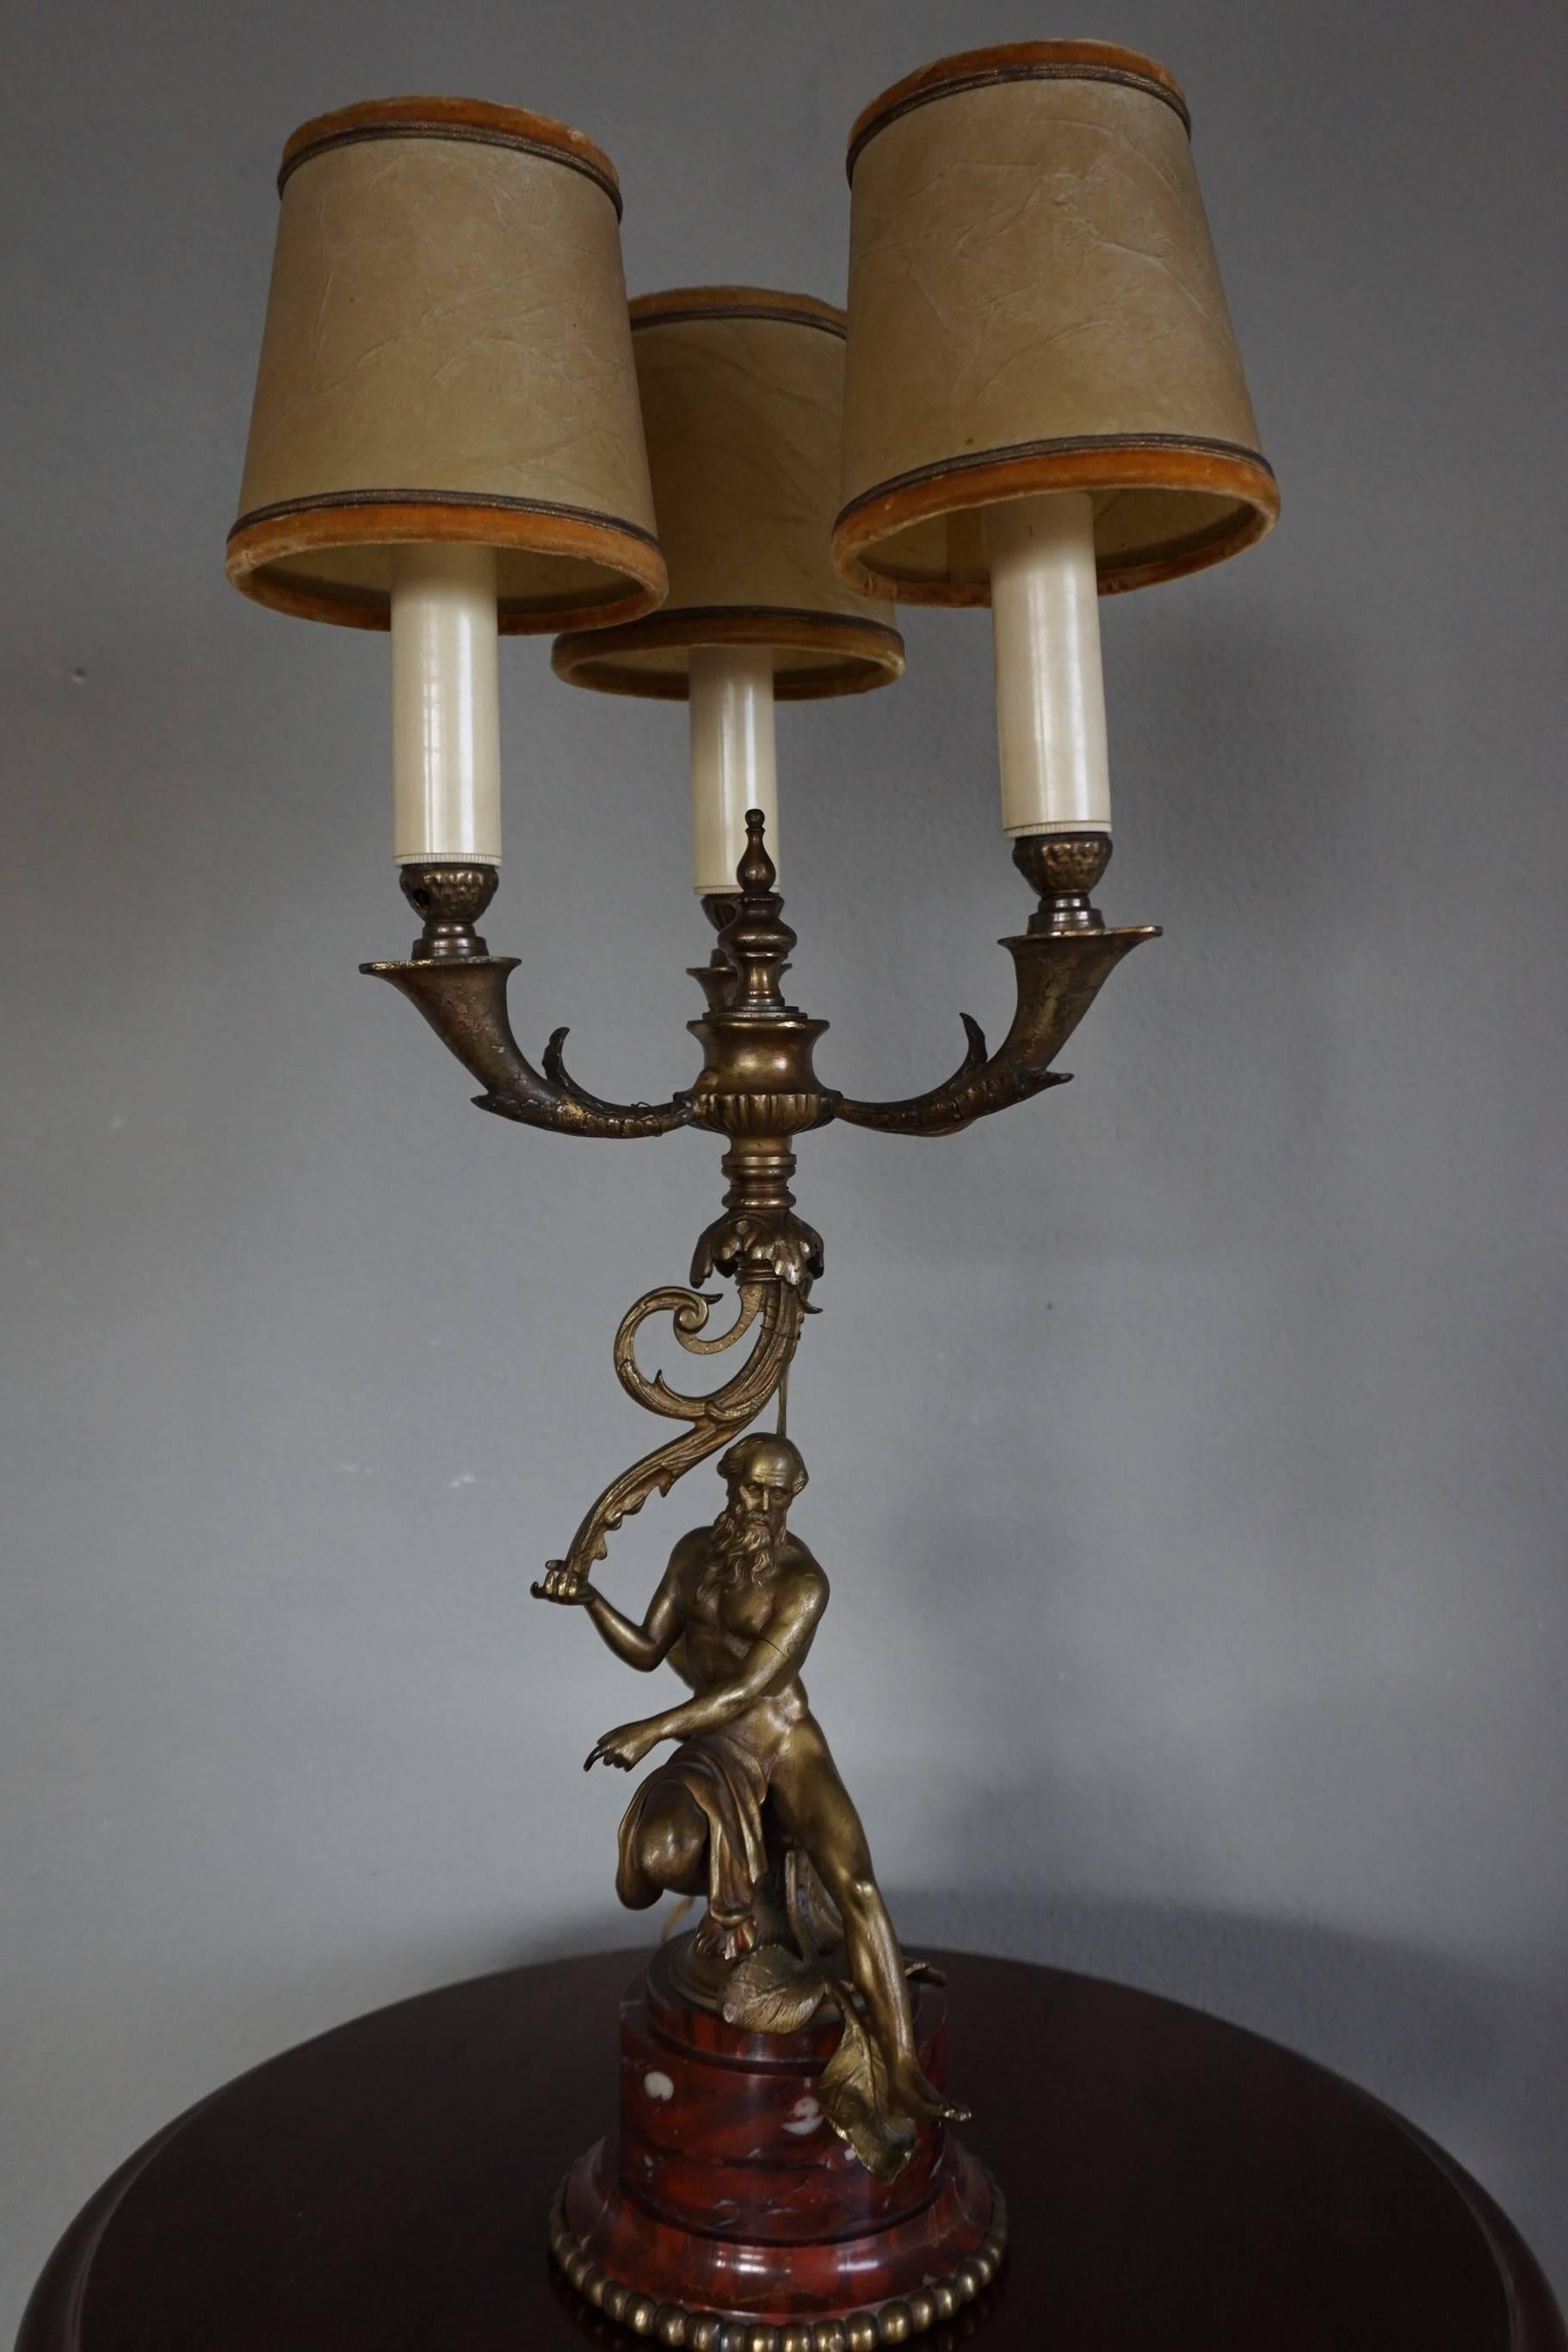 One of a kind and highly stylish bronze table lamp.

In Greek mythology Zeus is best known as the ruler of heaven and earth and as the father of all gods and mankind. In this beautifully made and antique table lamp, we think, he is depicted as the